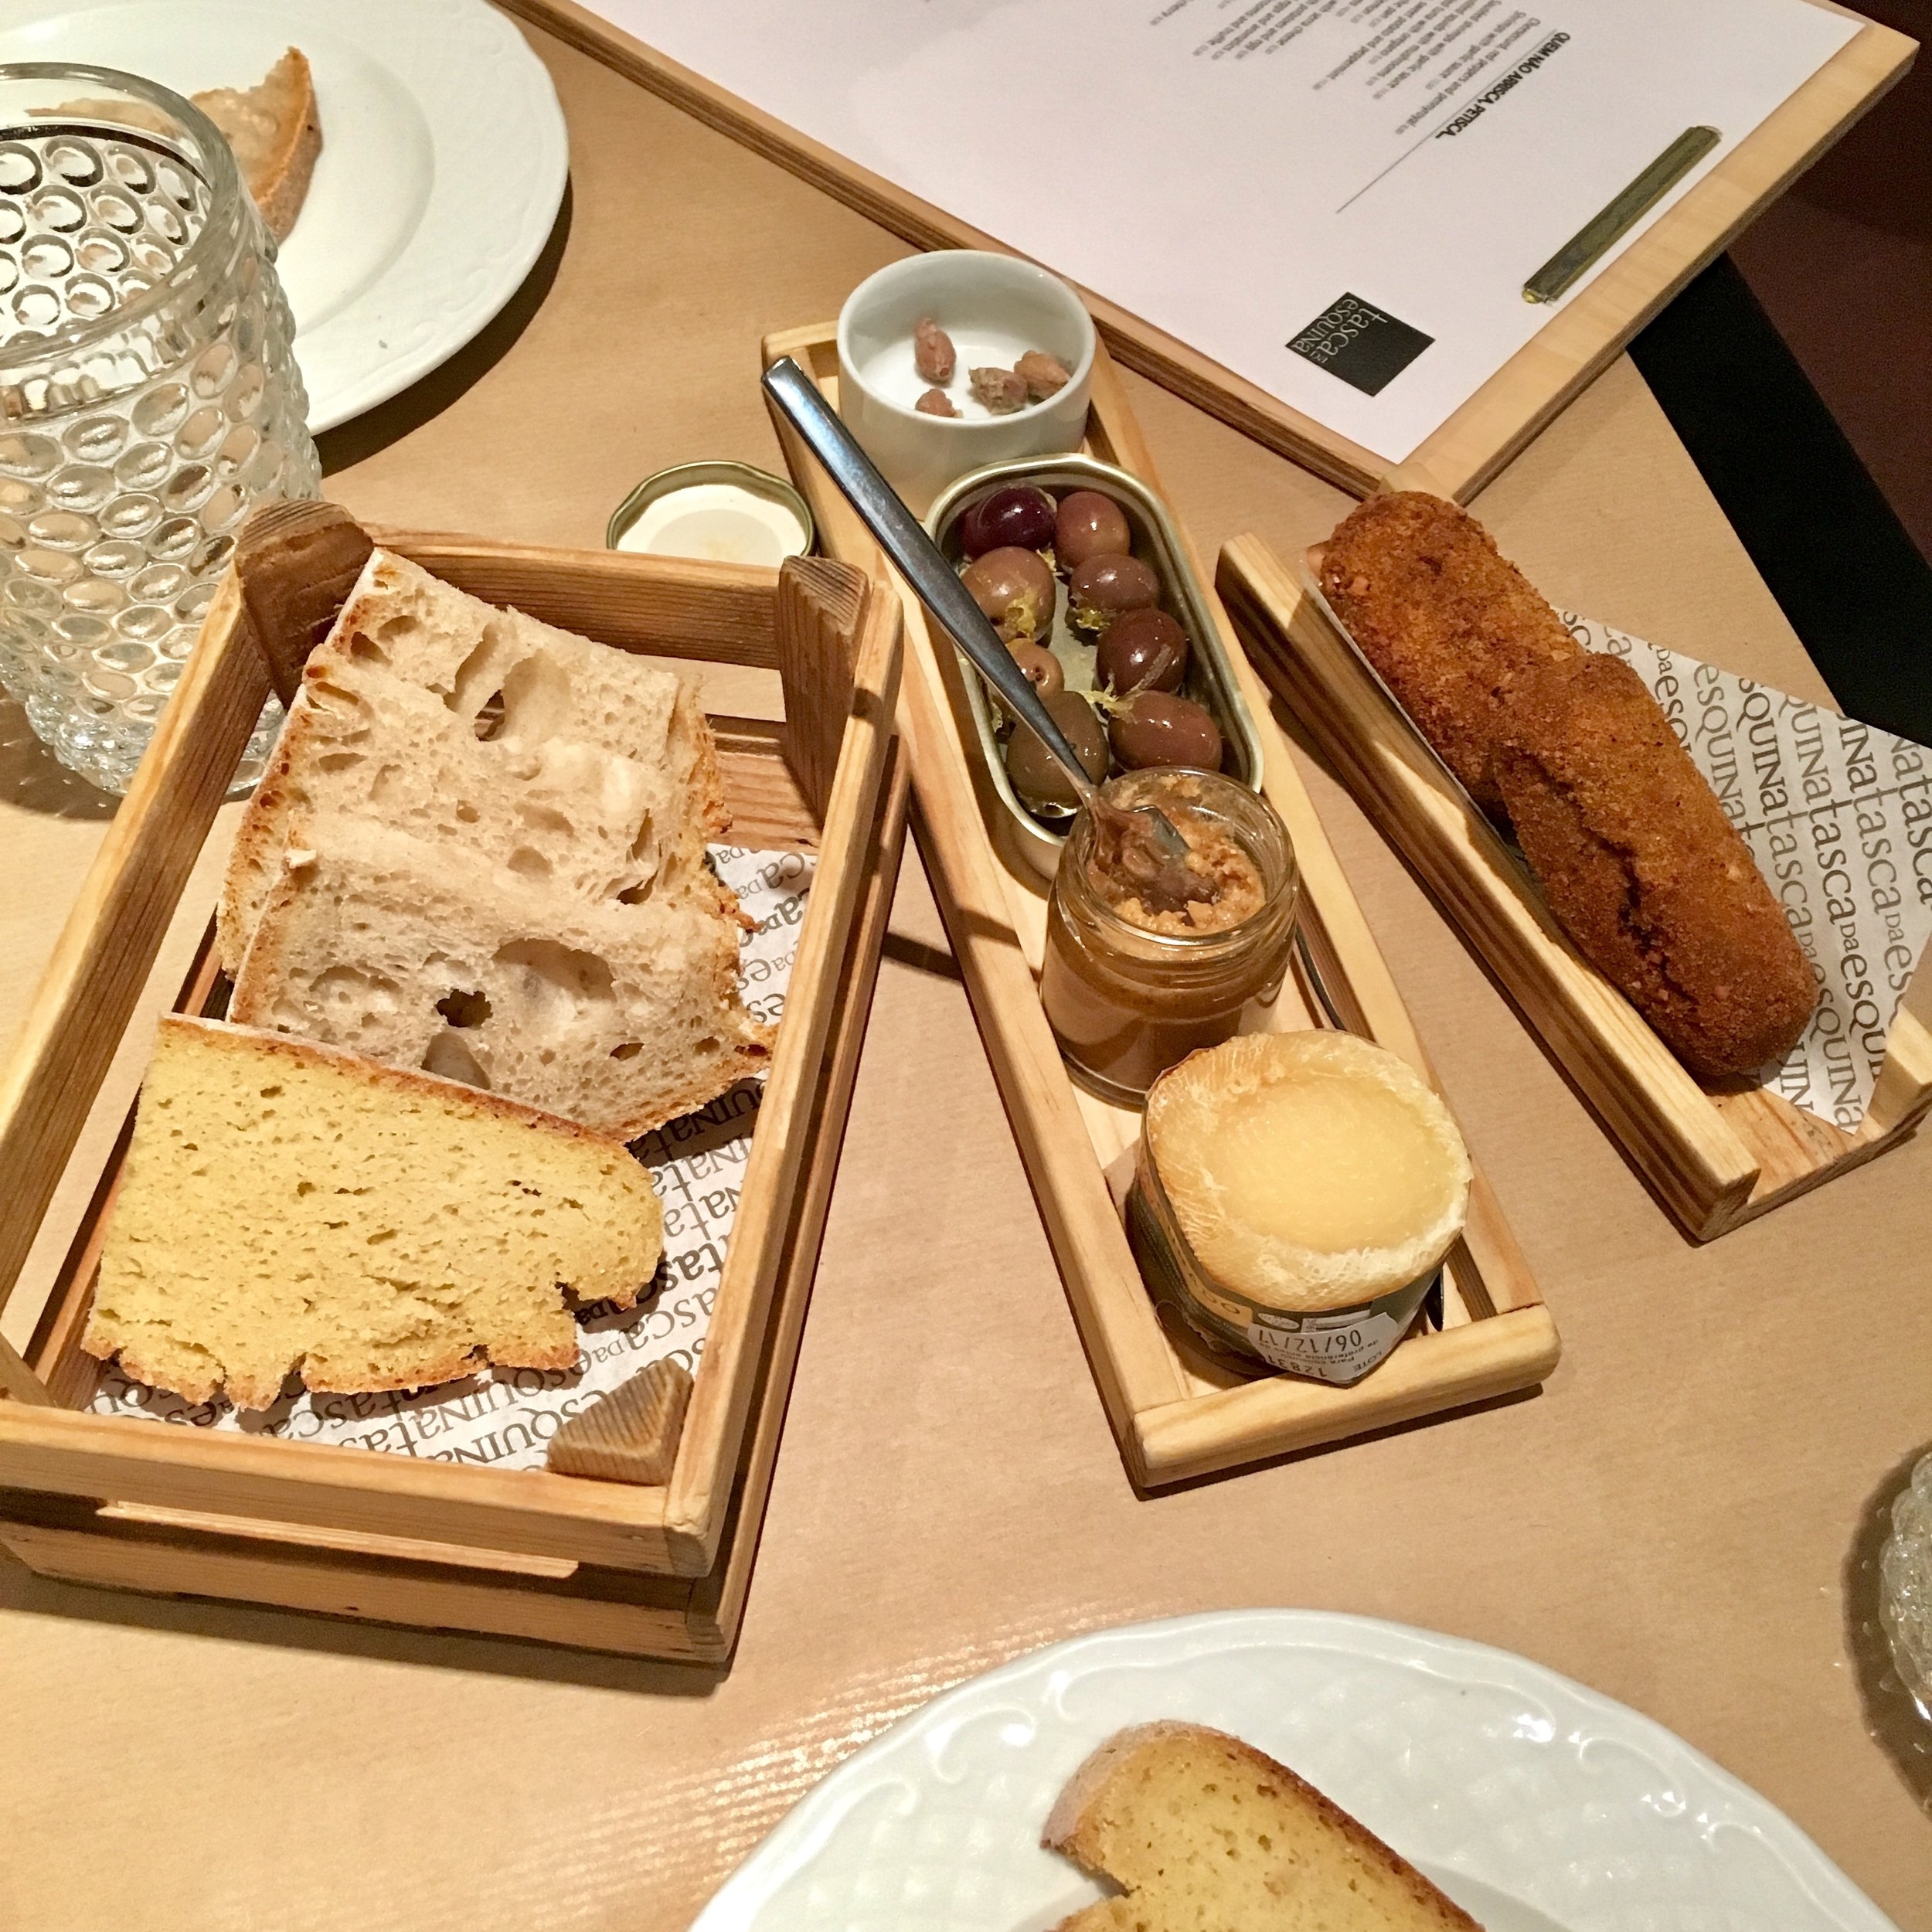 bread, olives, paté, cheese, croquettes